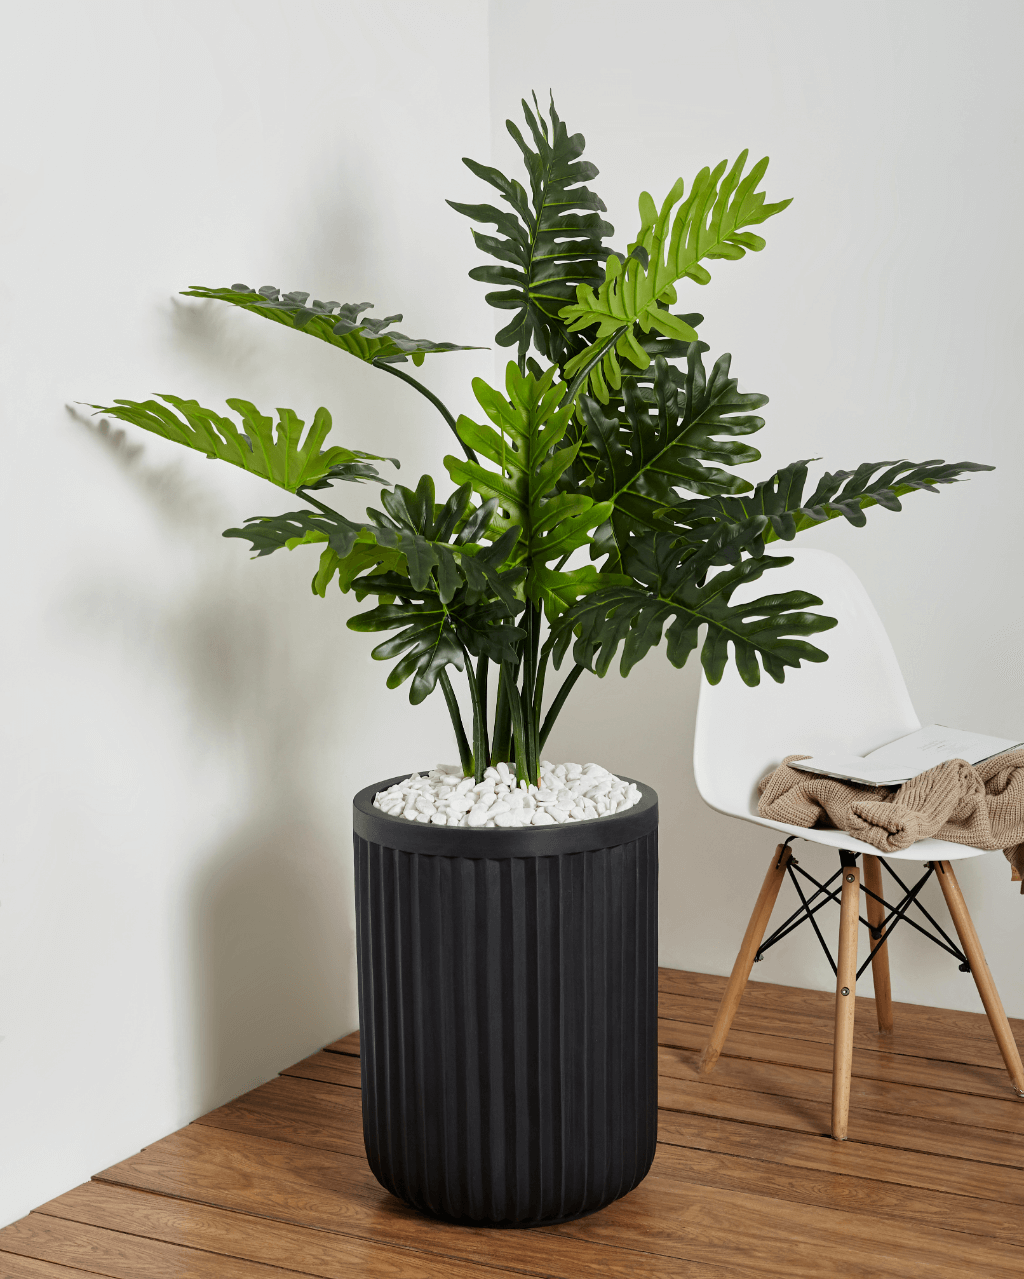 large-nordic-minimalist-fiberstone-lightweight-round-planter-pot-171411-inch-matte-finish-suitable-for-fiddle-leaf-fig-washed-black-1.jpg?t=woocommerce_gallery_thumbnail